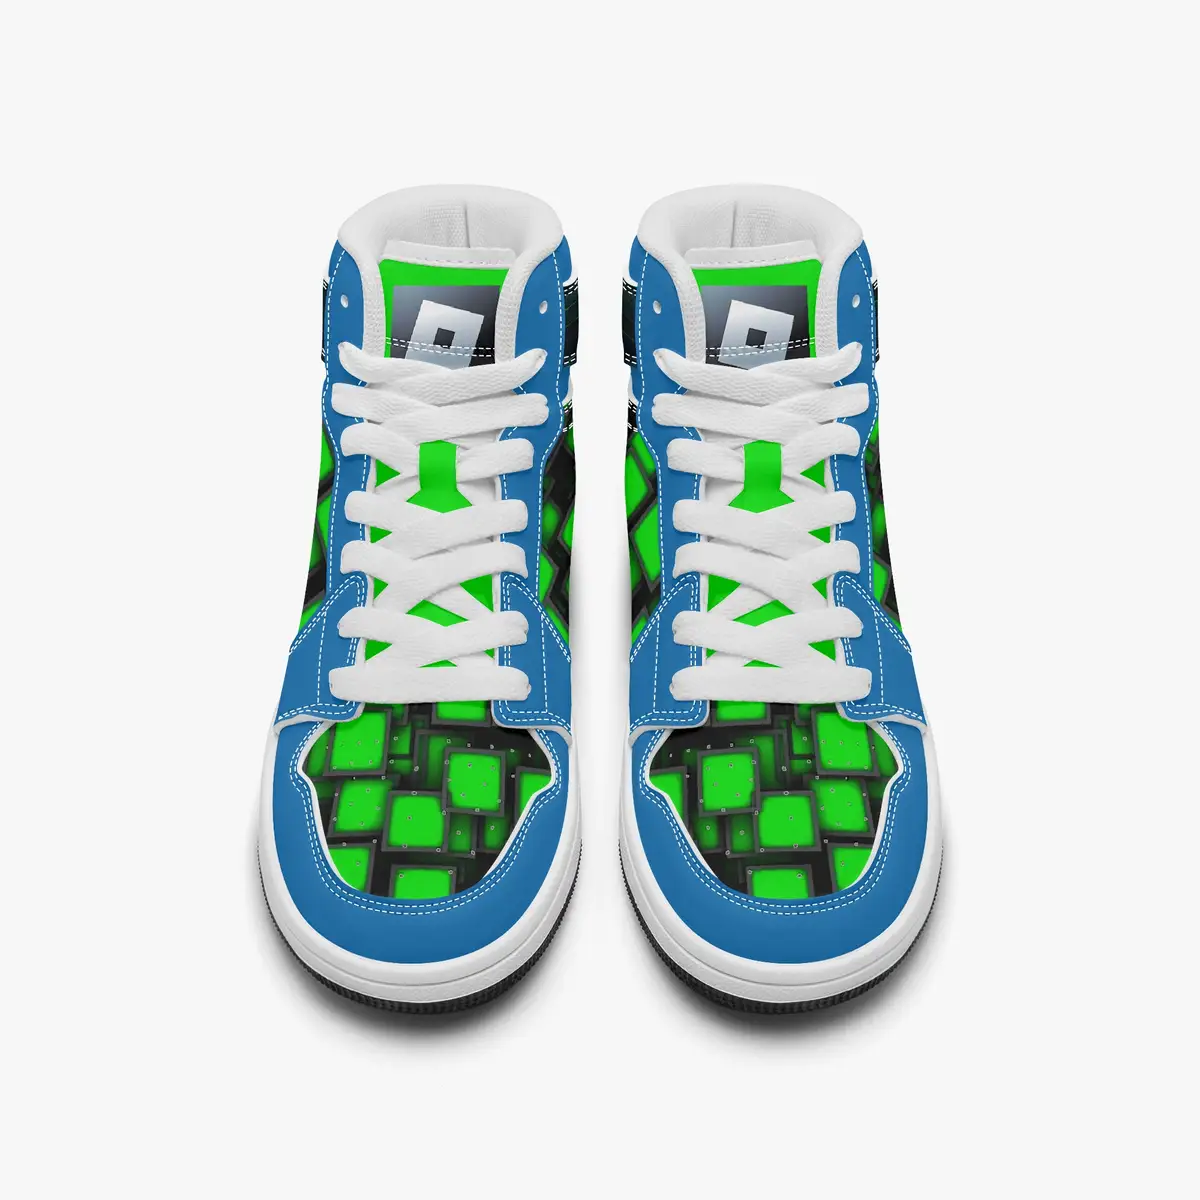 Kids ROBLOX Characters High-Top Shoes Leather Green and Blue, Jordans Style Sneakers Cool Kiddo 20